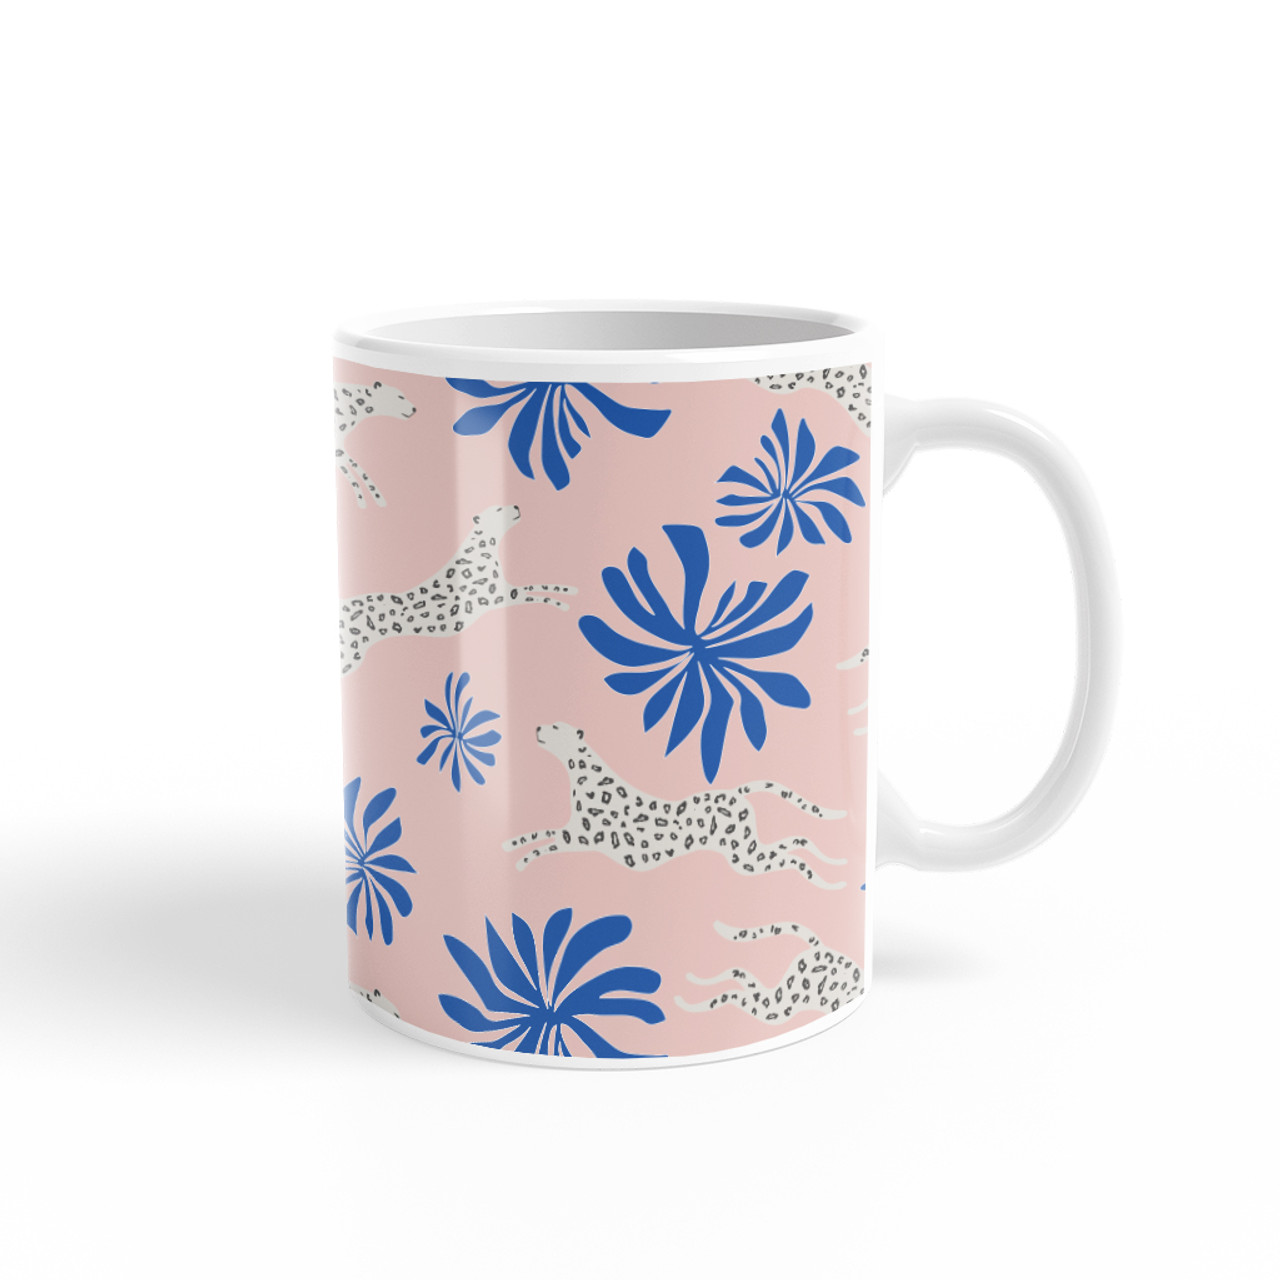 Modern Trendy Leopard Pattern Coffee Mug By Artists Collection